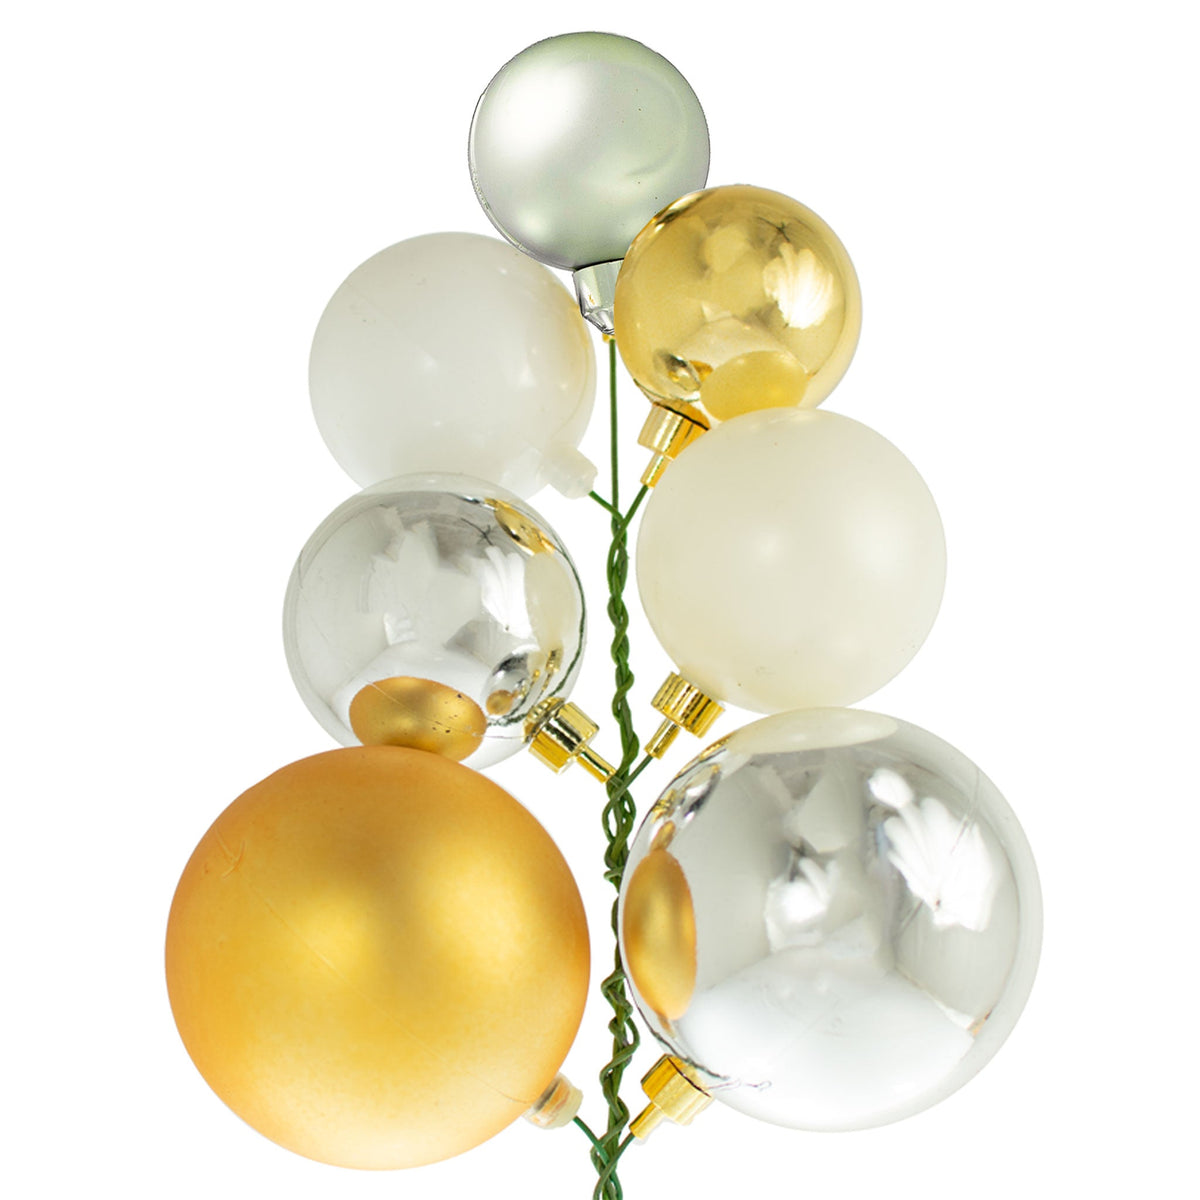 Colors include:  1 - Shiny Gold Ball Ornament (50MM) 1 - Matte Gold Ball Ornament (80MM) 1 - Matte White Ball Ornament (60MM) 1 - Shiny White Ball Ornament (60MM) 1 - Matte Silver Ball Ornament (50MM) 2 - Shiny Silver Ball Ornaments (80MM, 60MM)